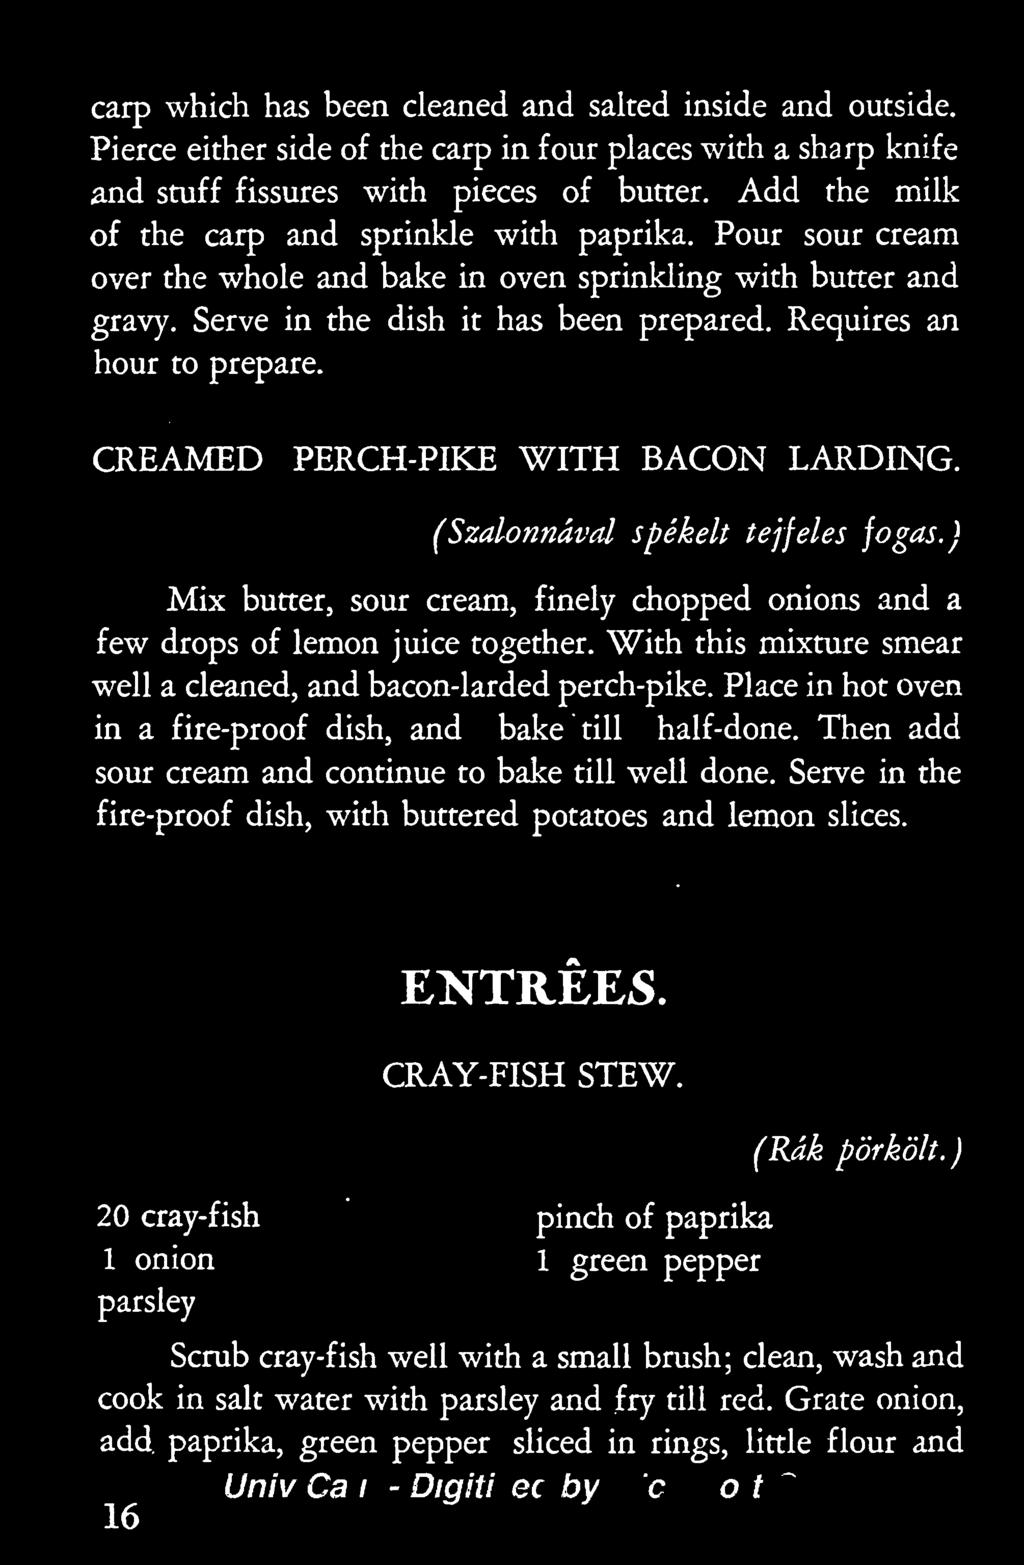 Requires an hour to prepare. CREAMED PERCH-PIKE WITH BACON LARDING. (Szalonnaval spekelt tejfeles jogas.) Mix butter, sour cream, finely chopped onions and a few drops of lemon juice together.